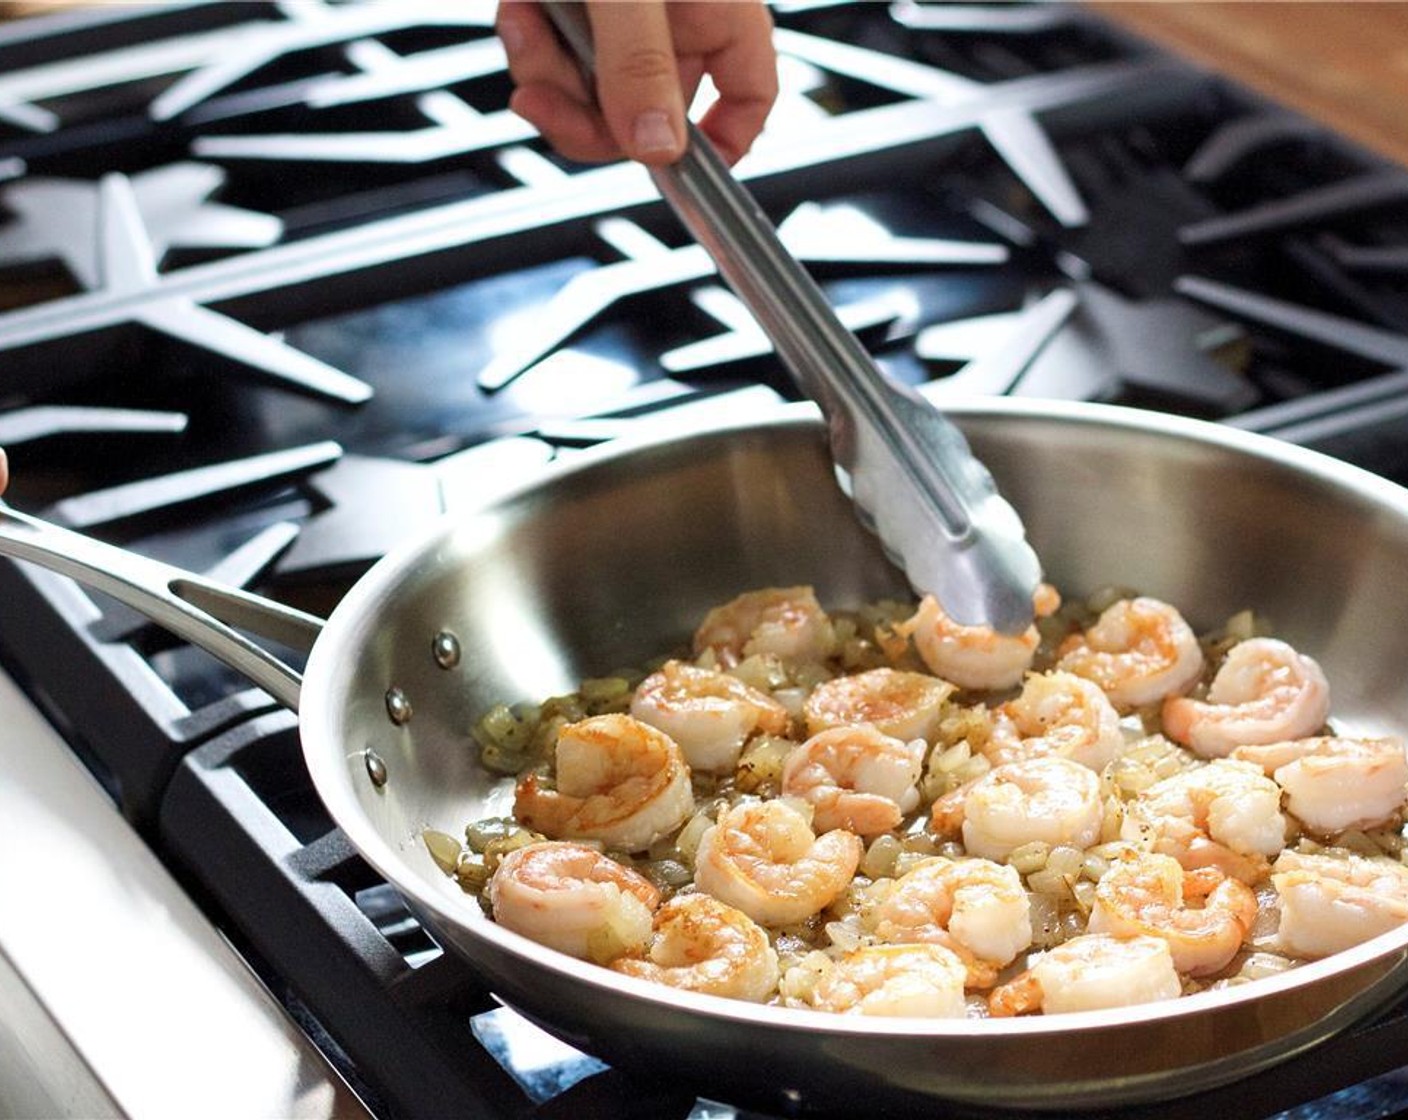 step 6 Carefully add the shrimp in a single layer. Cook for one minute on each side and remove shrimp to a plate. Deglaze the pan with White Cooking Wine (1/2 cup) and let it reduce by half.